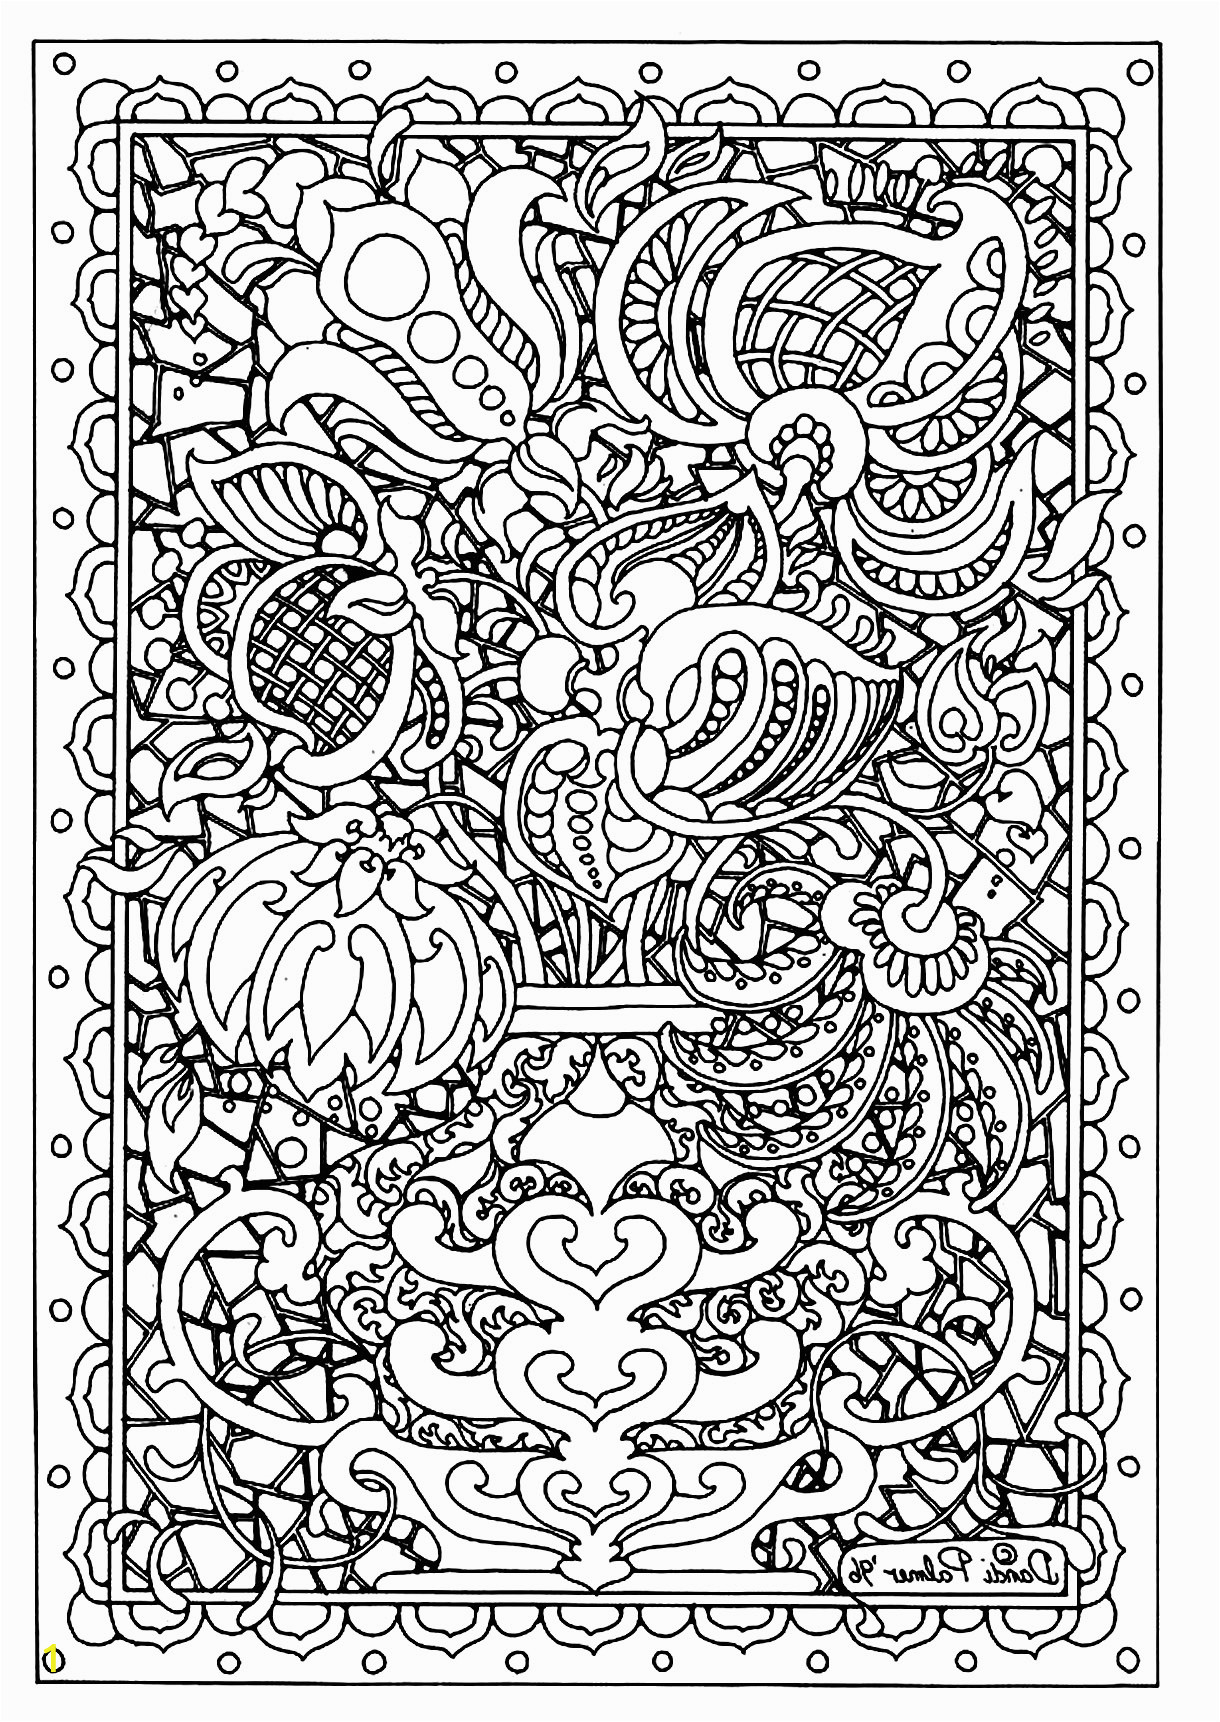 Coloring Pages Of Flowers for Teenagers Difficult Flower Difficult Flowers Adult Coloring Pages